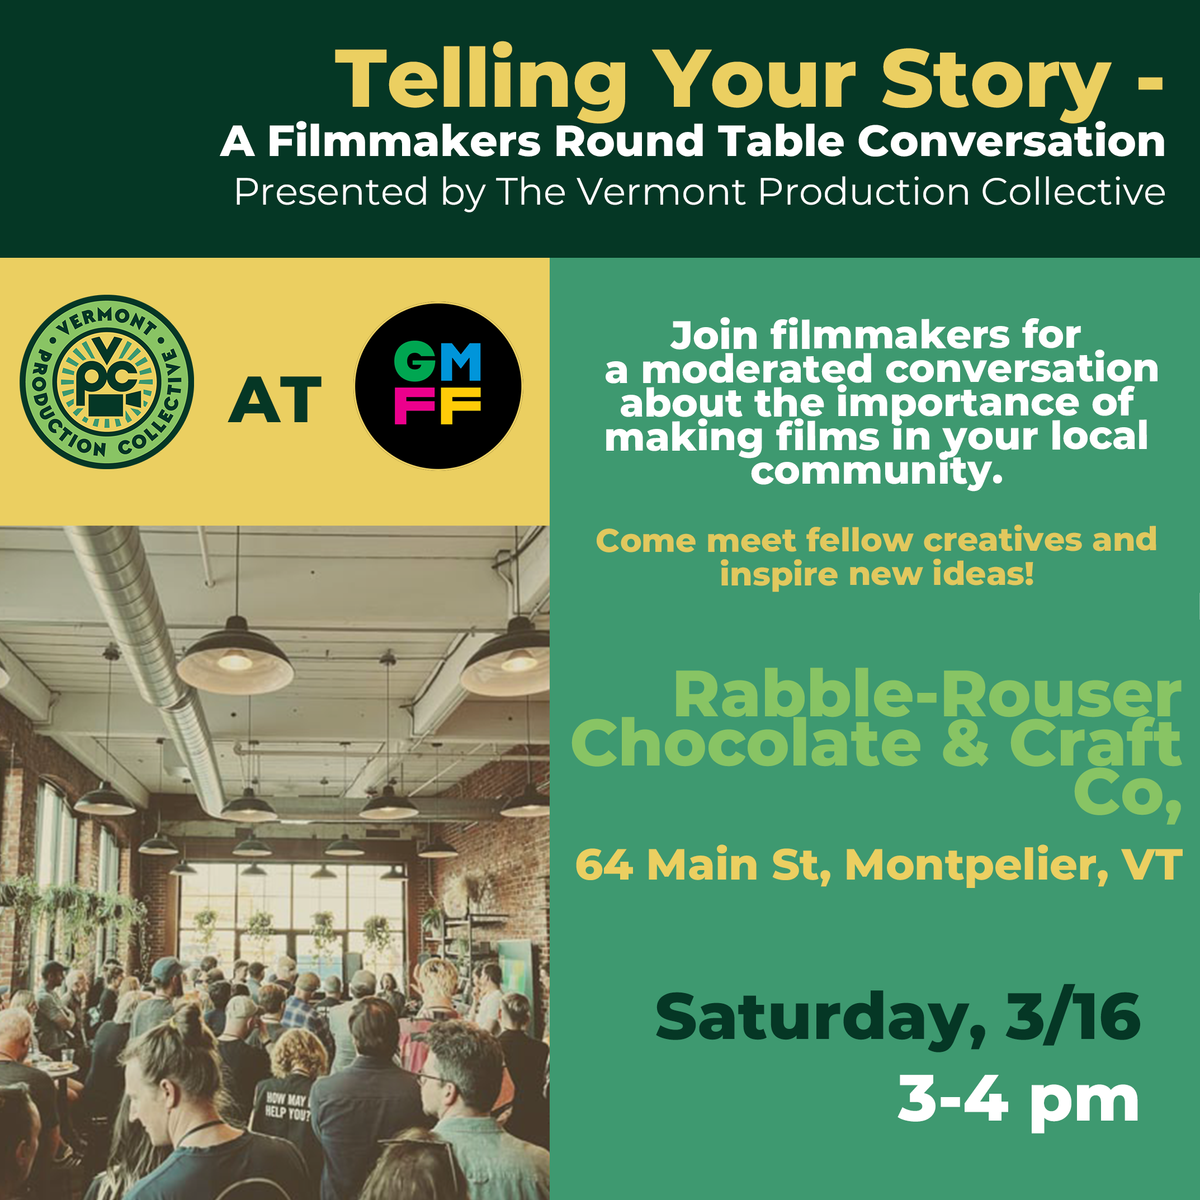 A Filmmakers Round Table Conversation Presented by The Vermont Production Collective - *FREE* GMFF Special Event